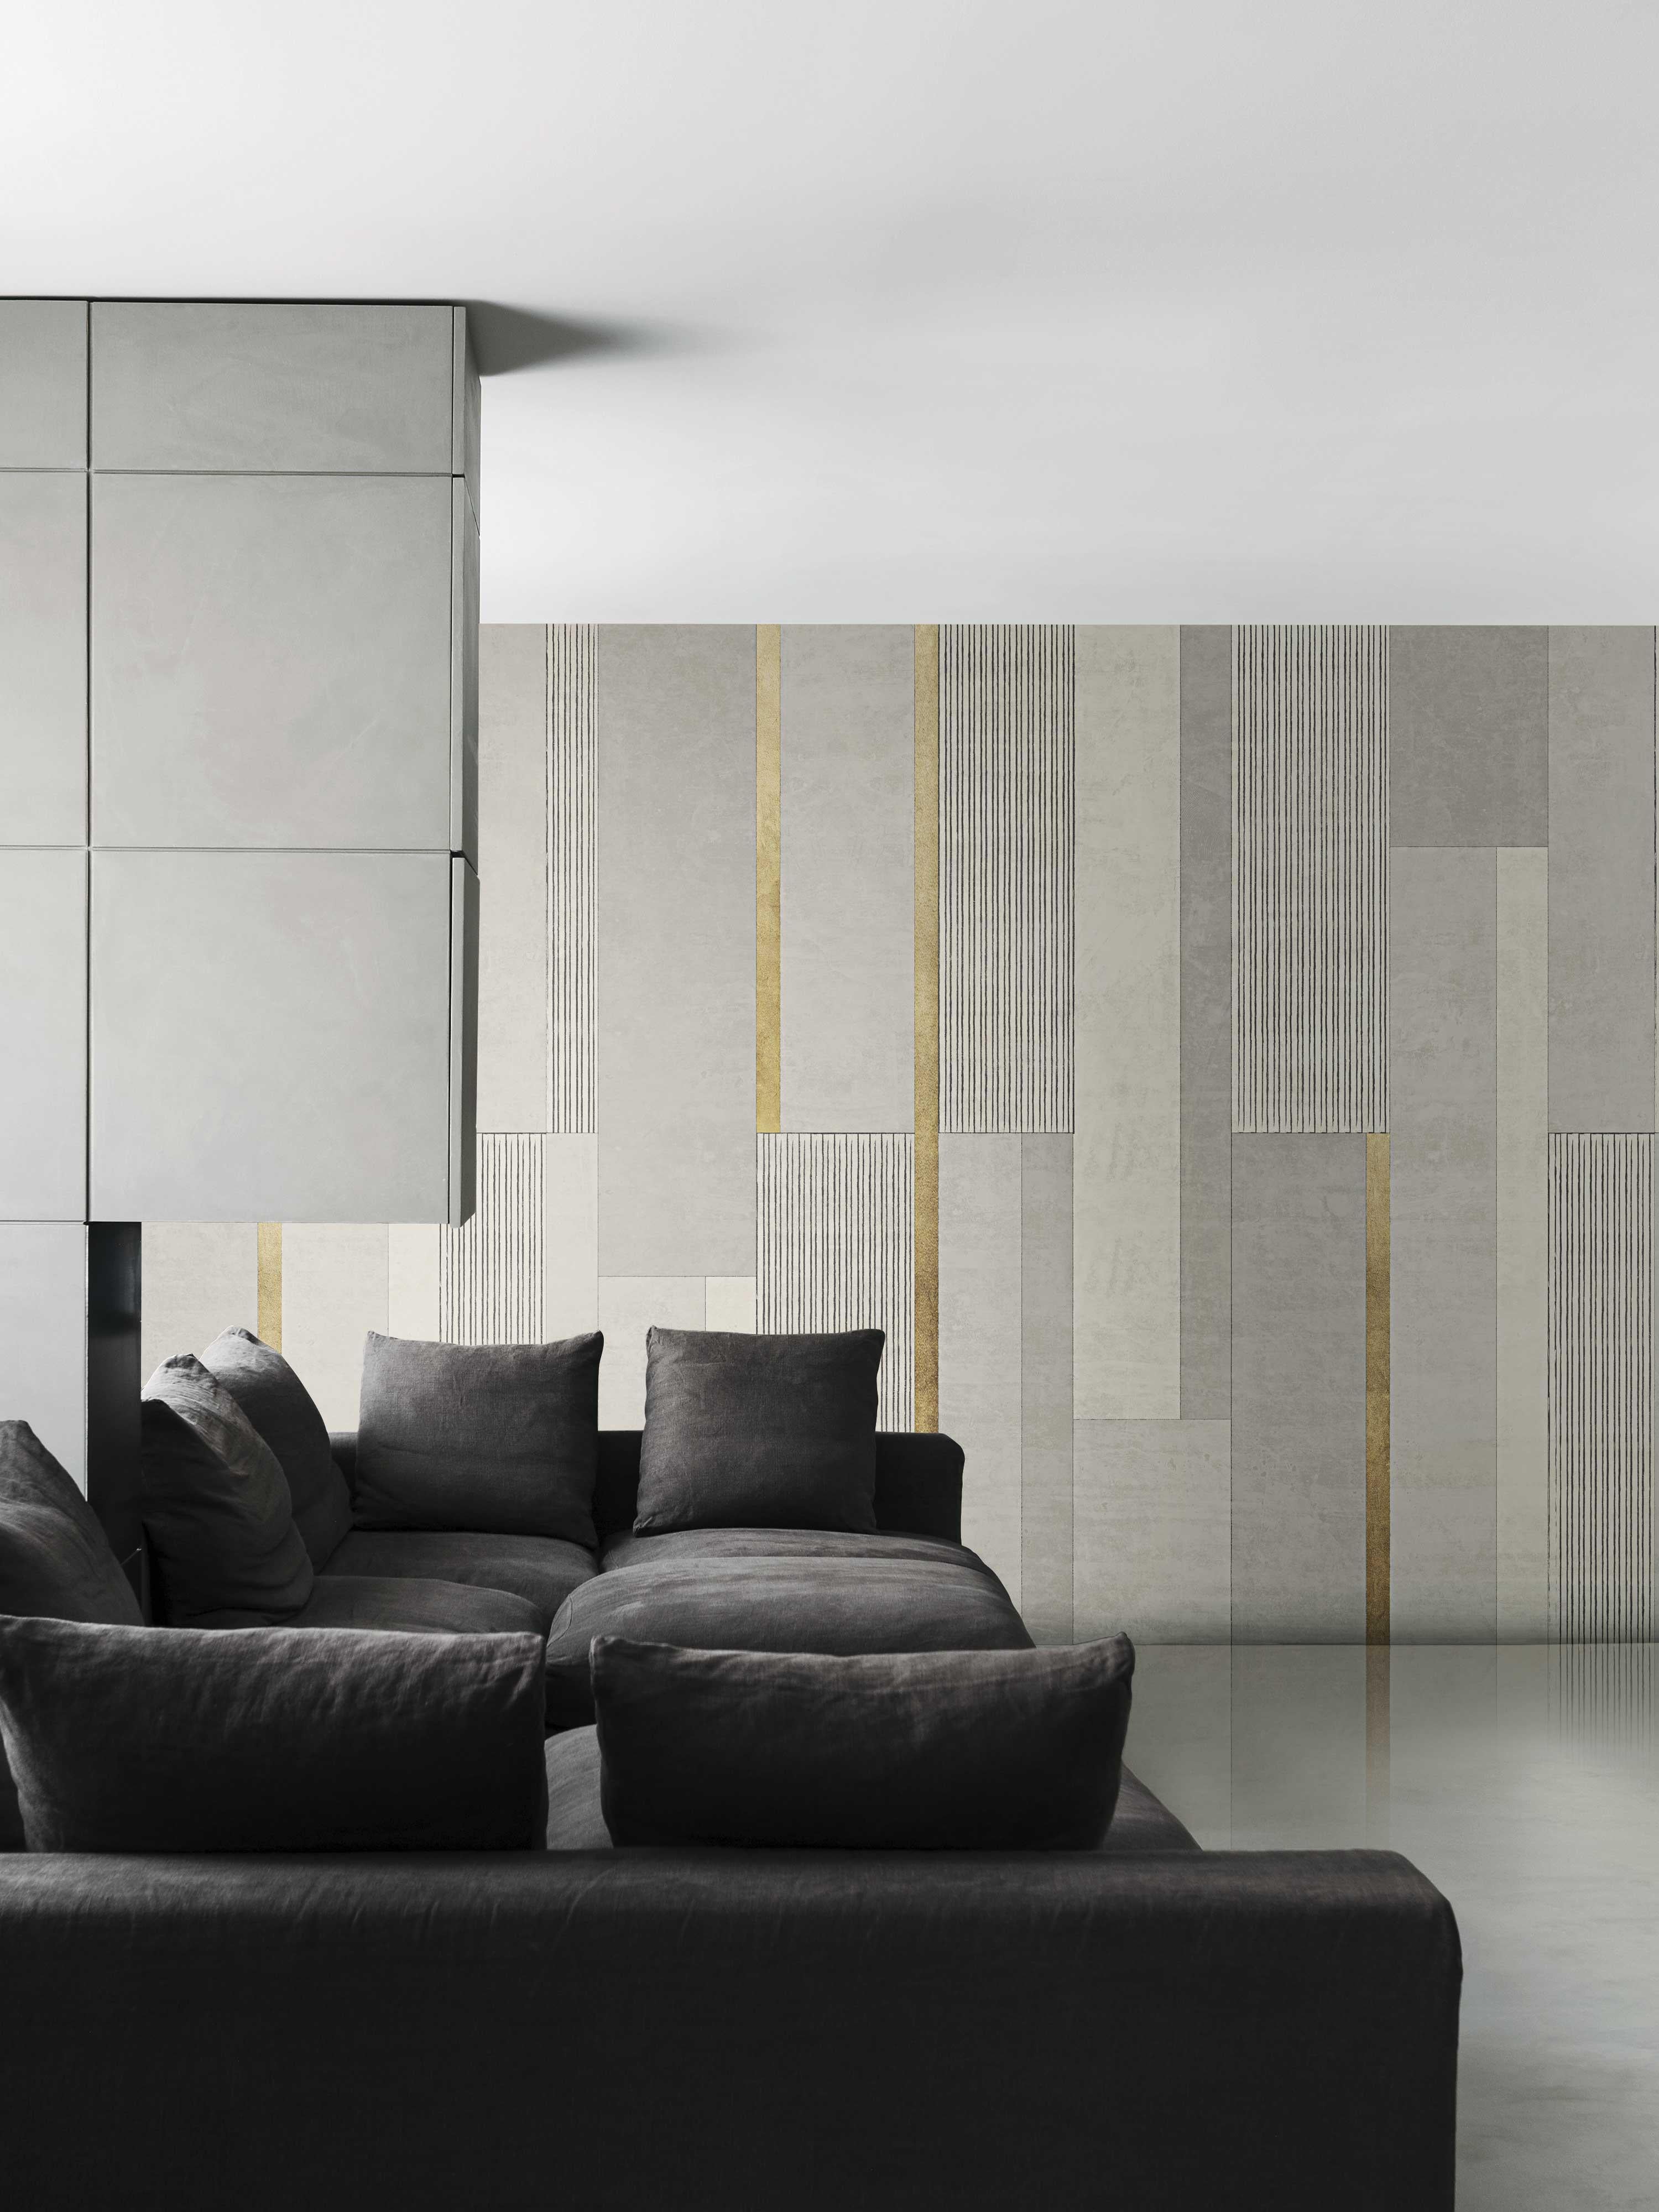 Available in pearl grey, this wallpaper, composed of vertical elements of different materials, is extremely sober and elegant and fits perfectly in any type of context. Measure: 400x310 cm.